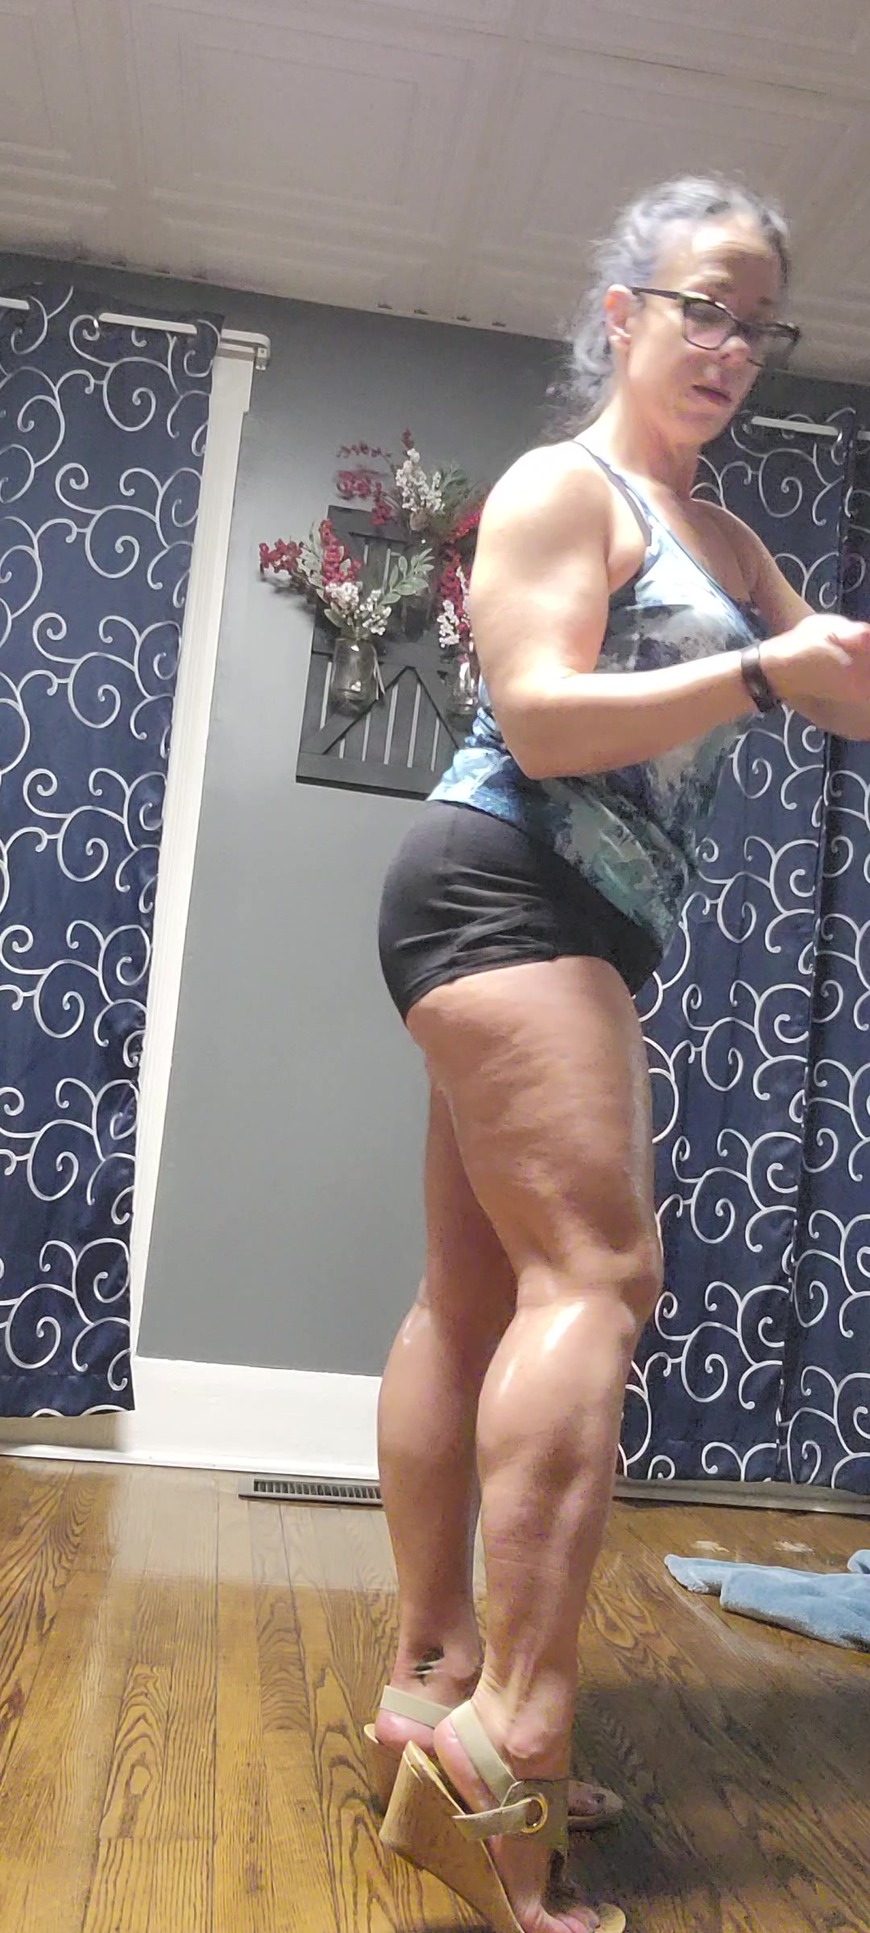 Strong sexy legs - clip coverforeground